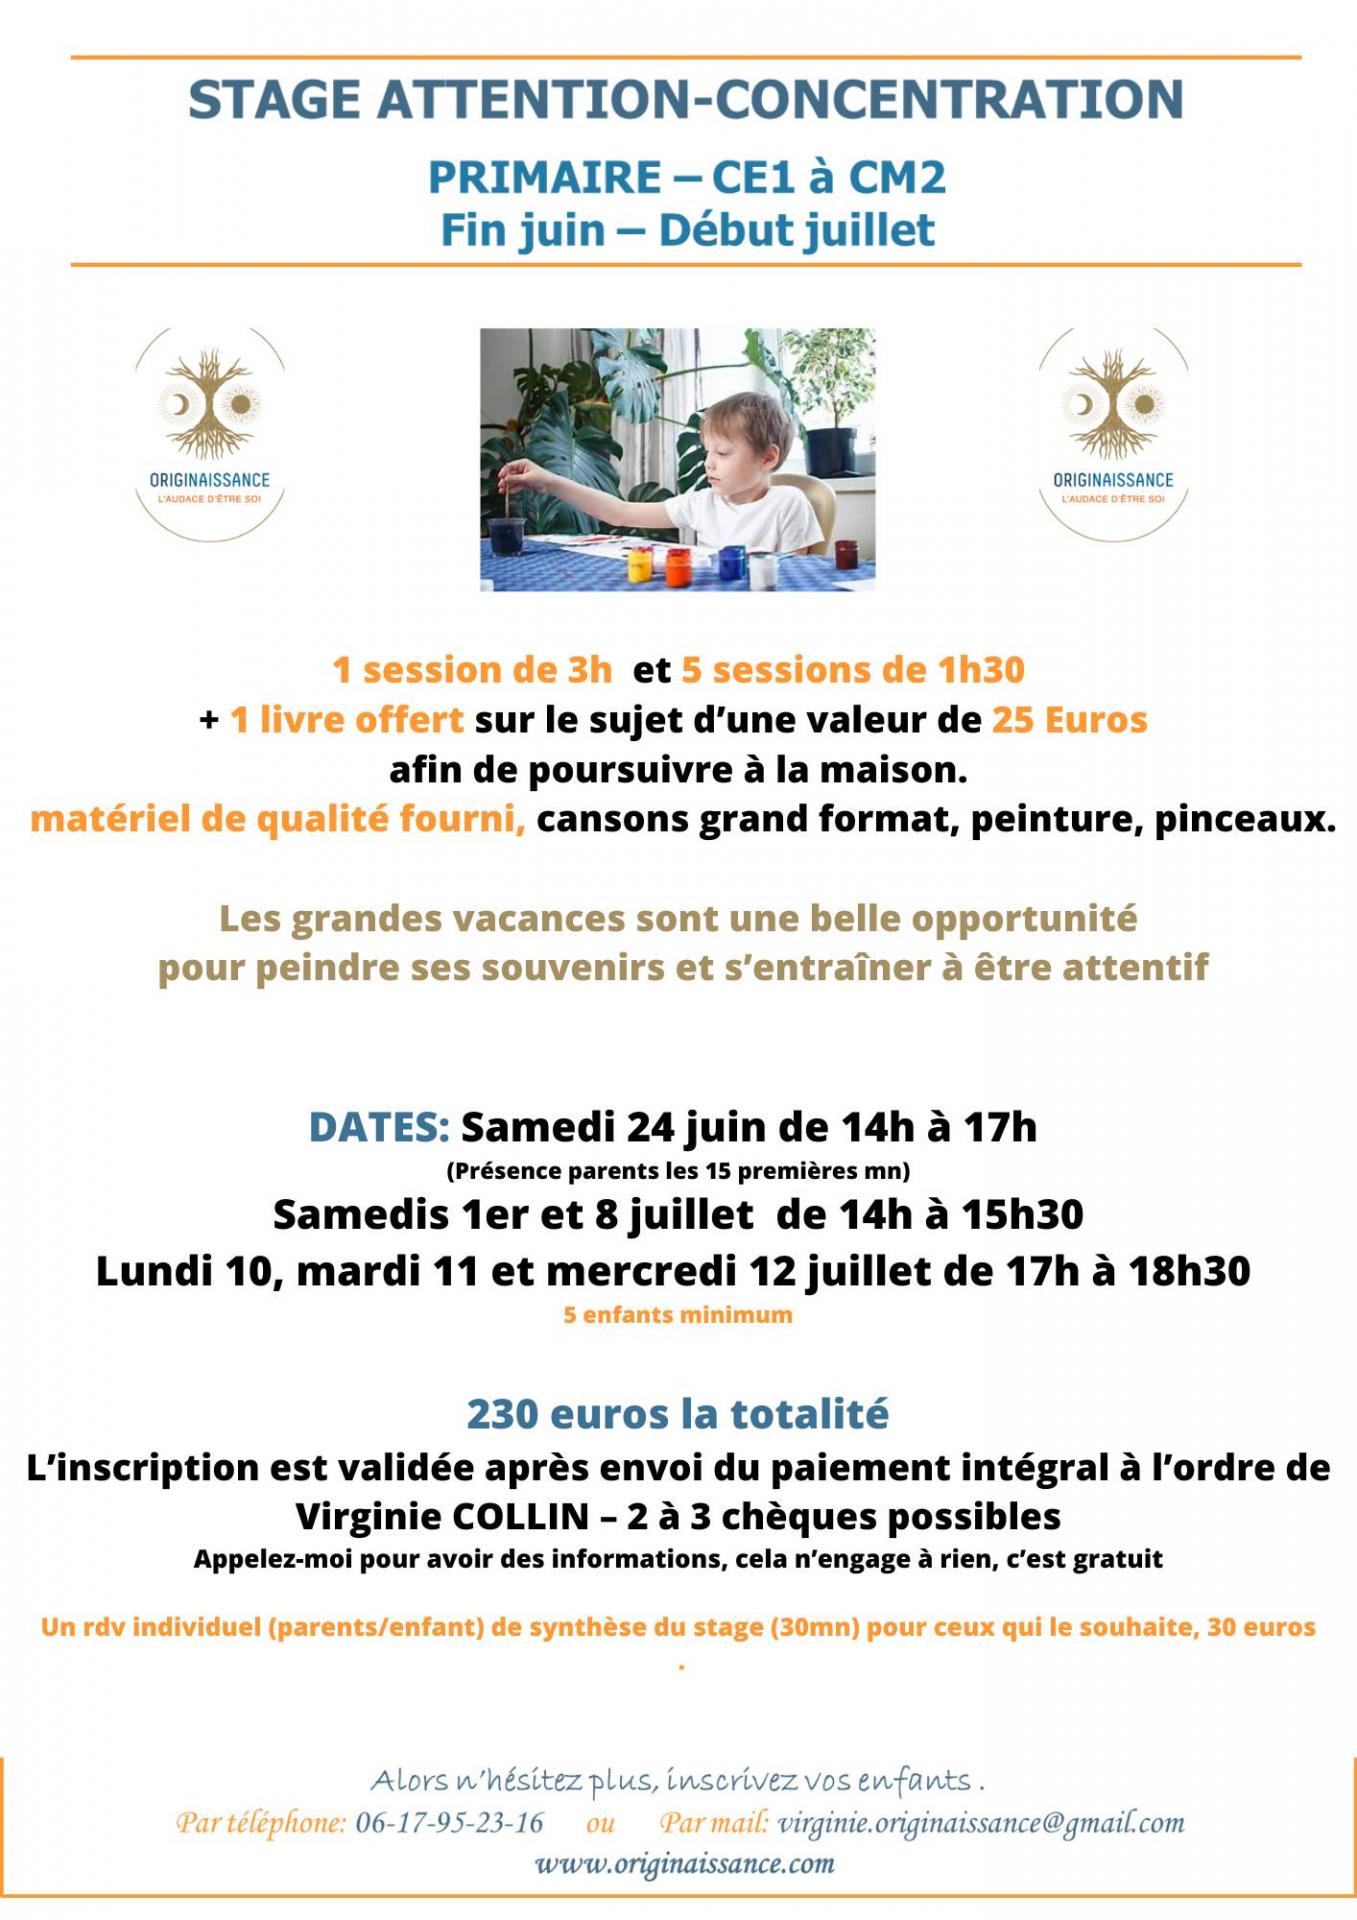 Stage primaire attention concentration 2